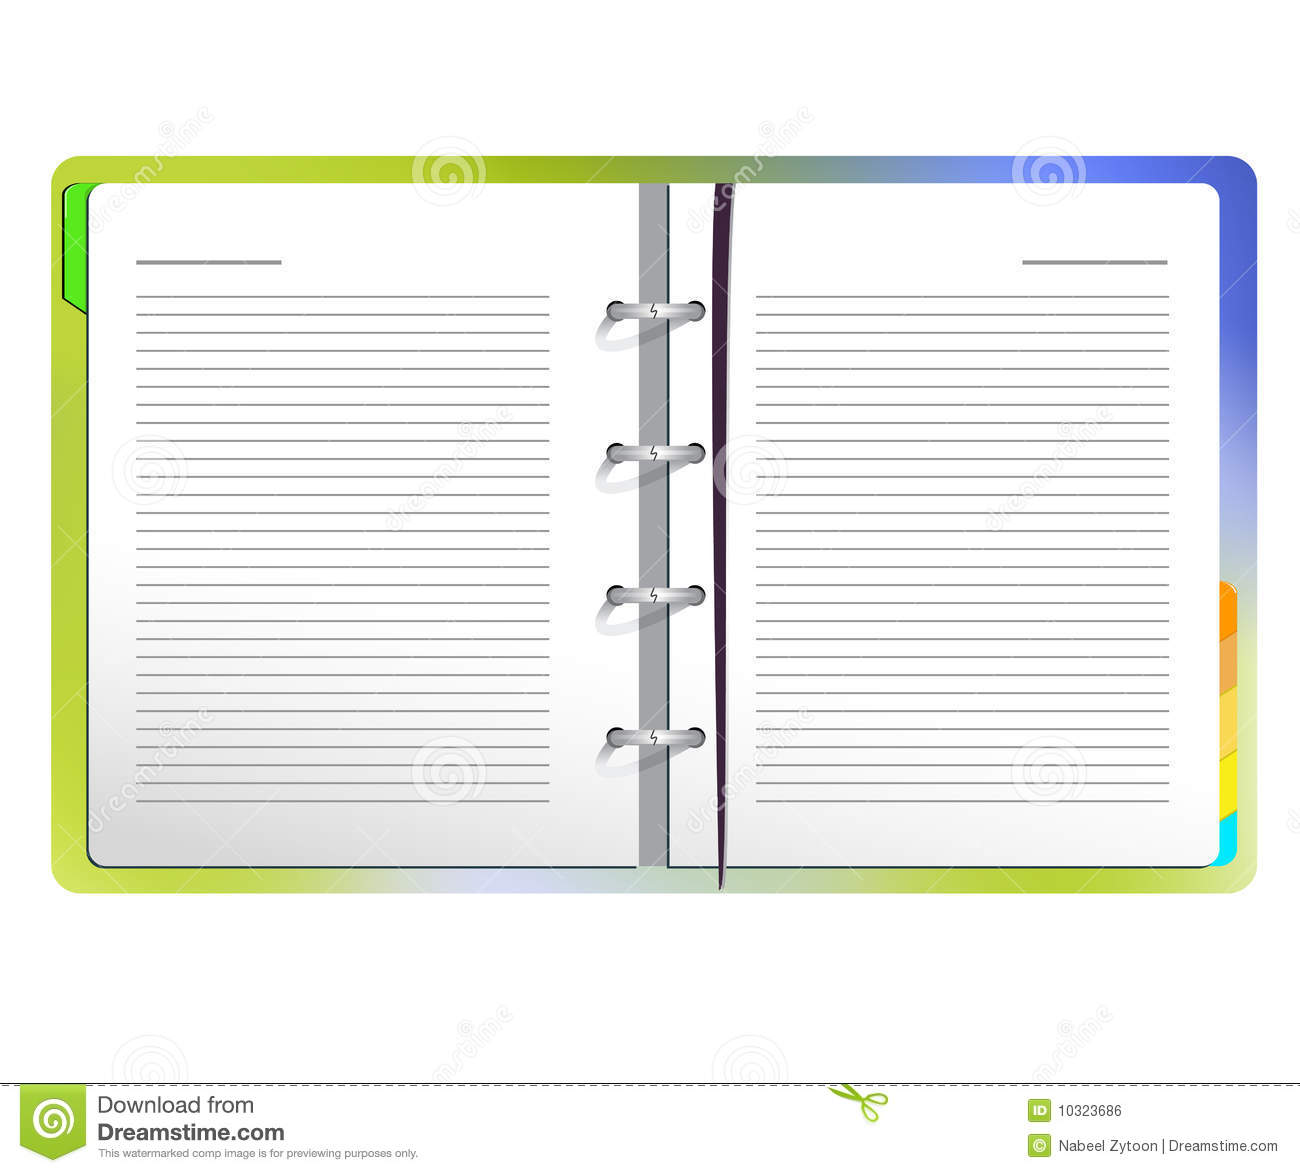 Open Notebook Royalty Free Stock Image   Image  10323686